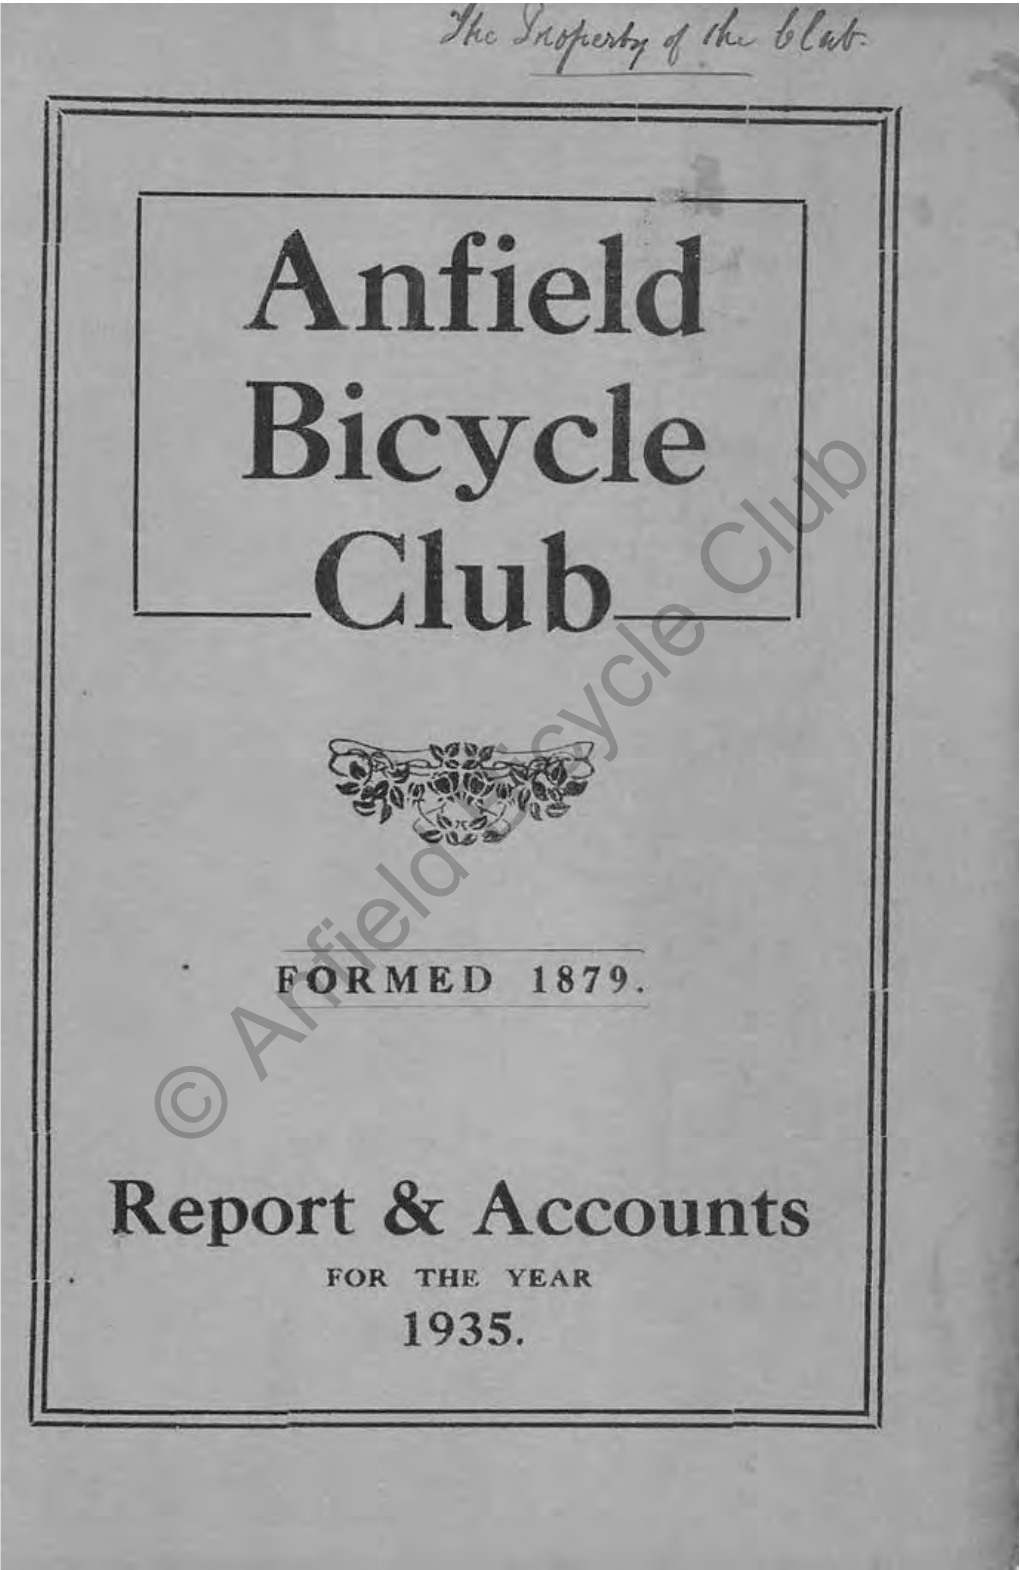 Anfield Bicycle Club Annual Report